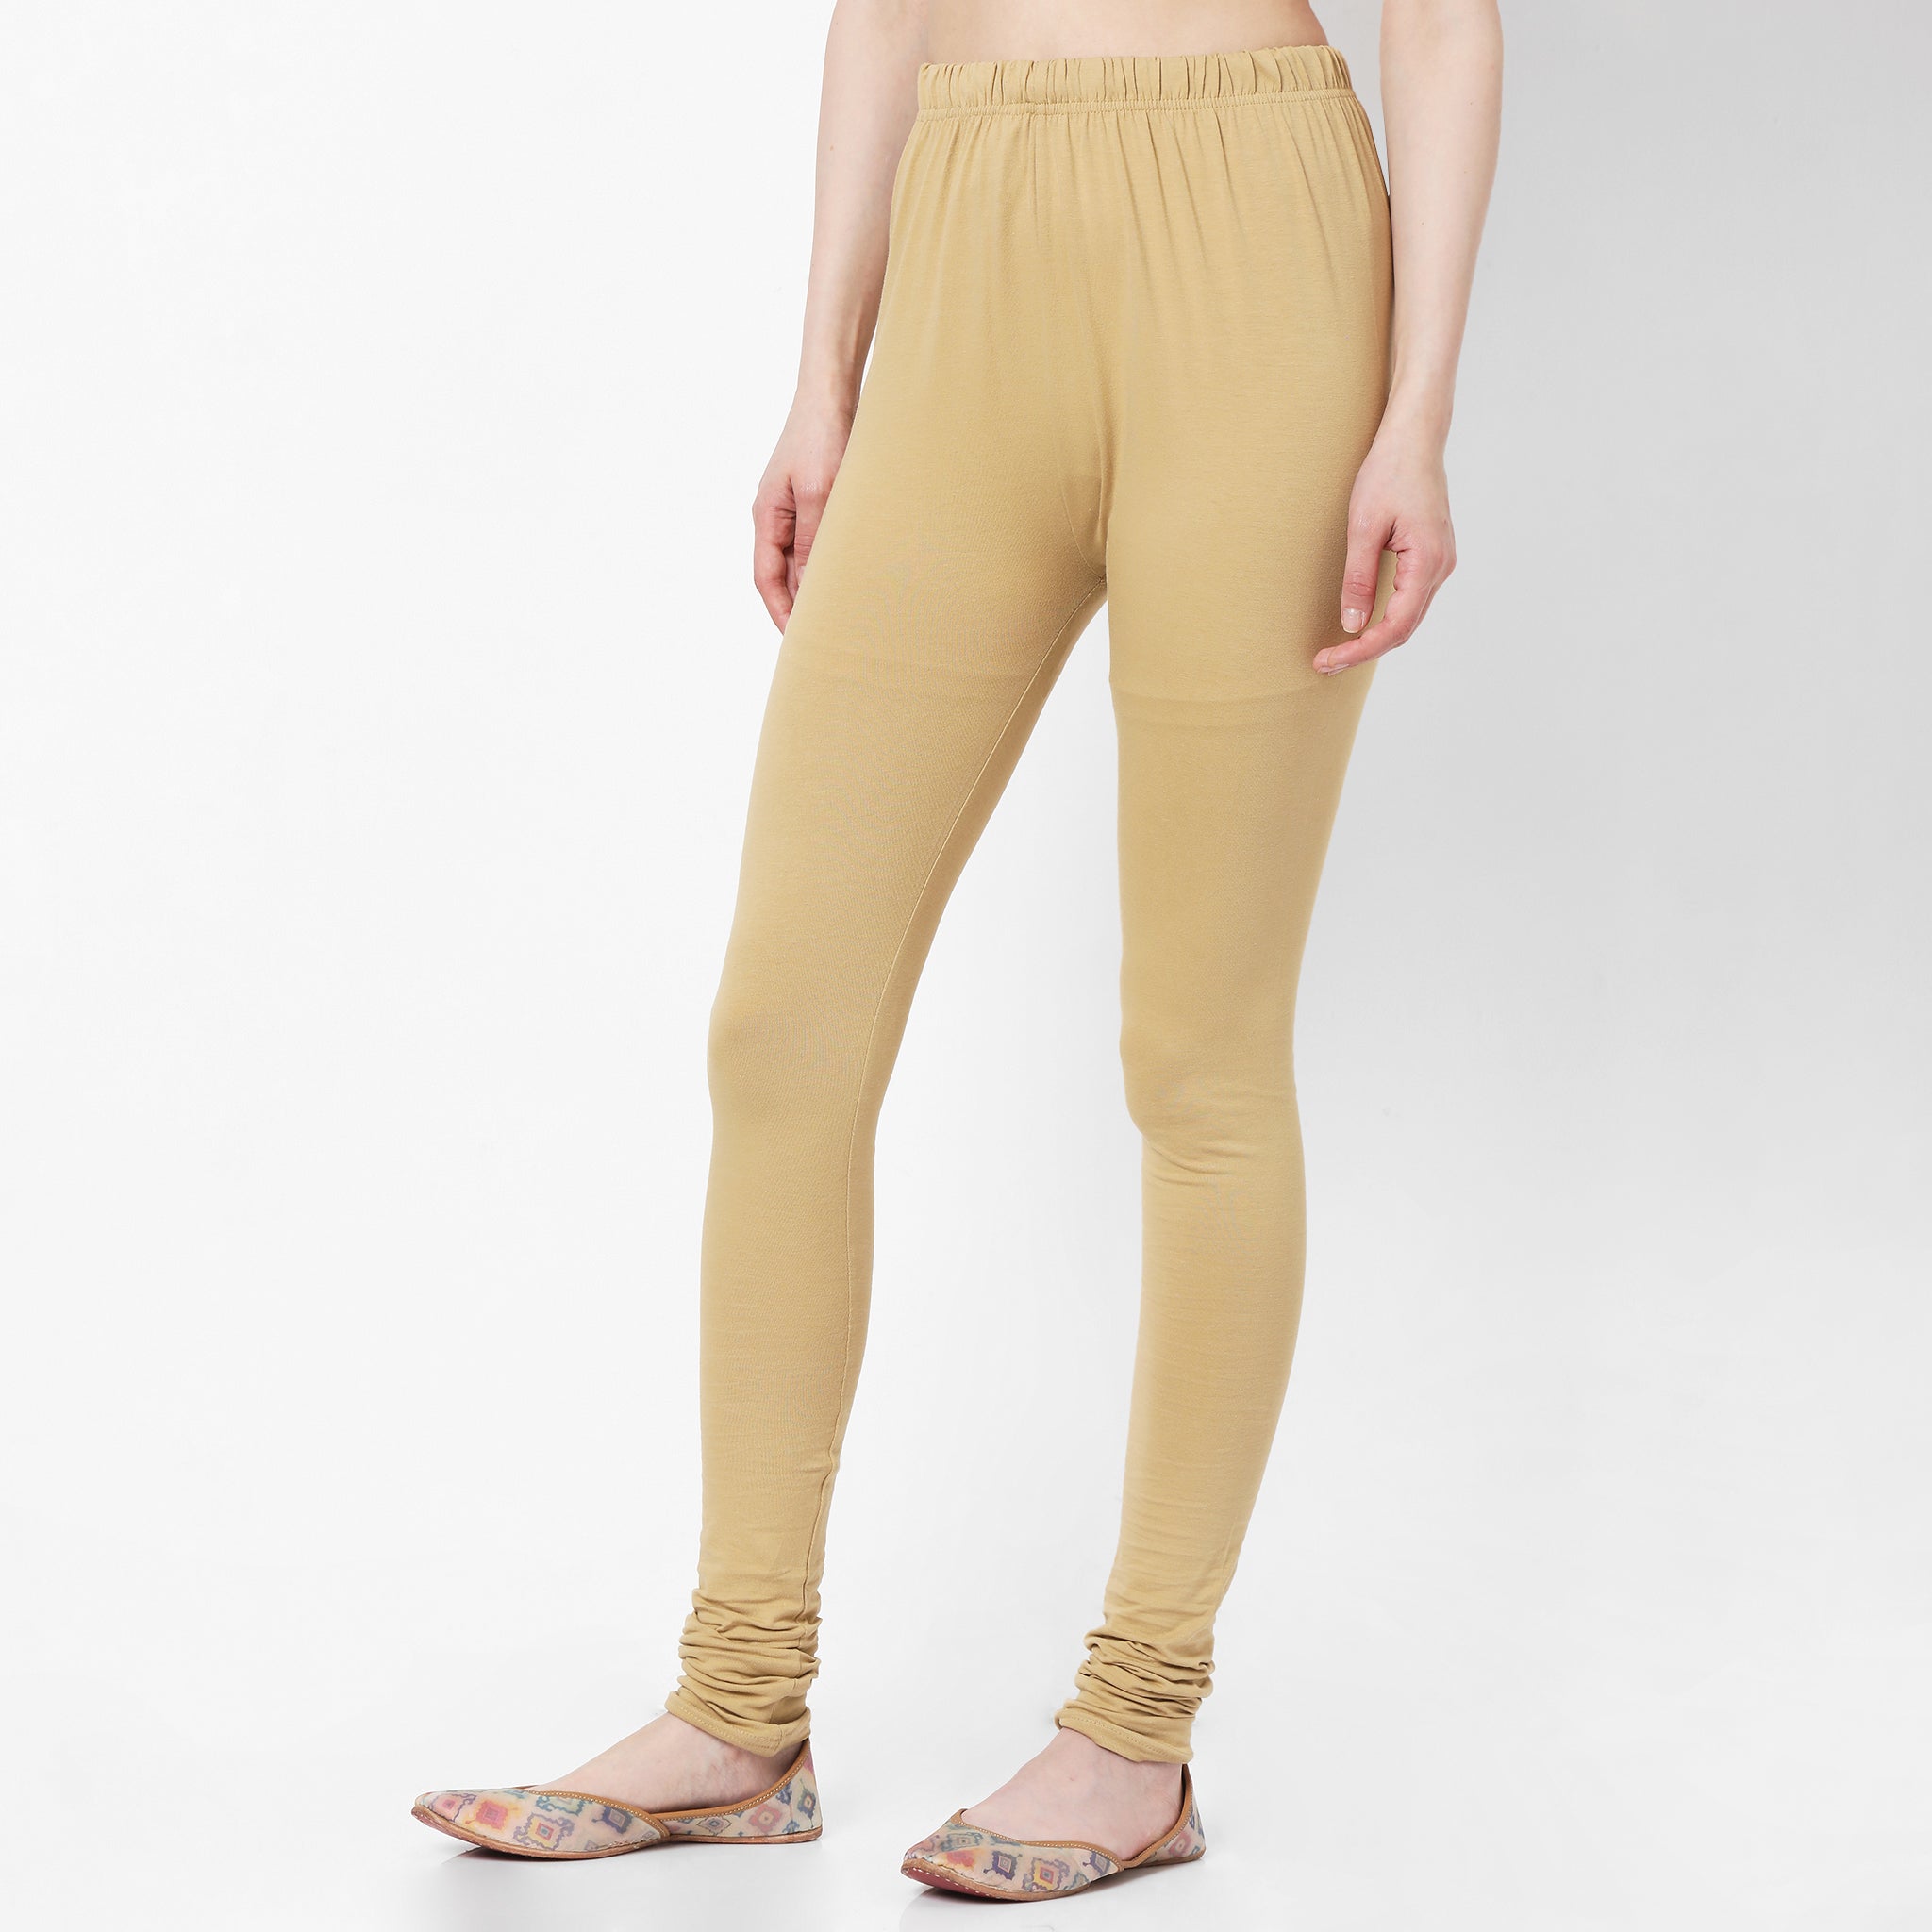 Straight Fit Women Plain Cotton Legging, Size: Small at Rs 150 in Rudrapur